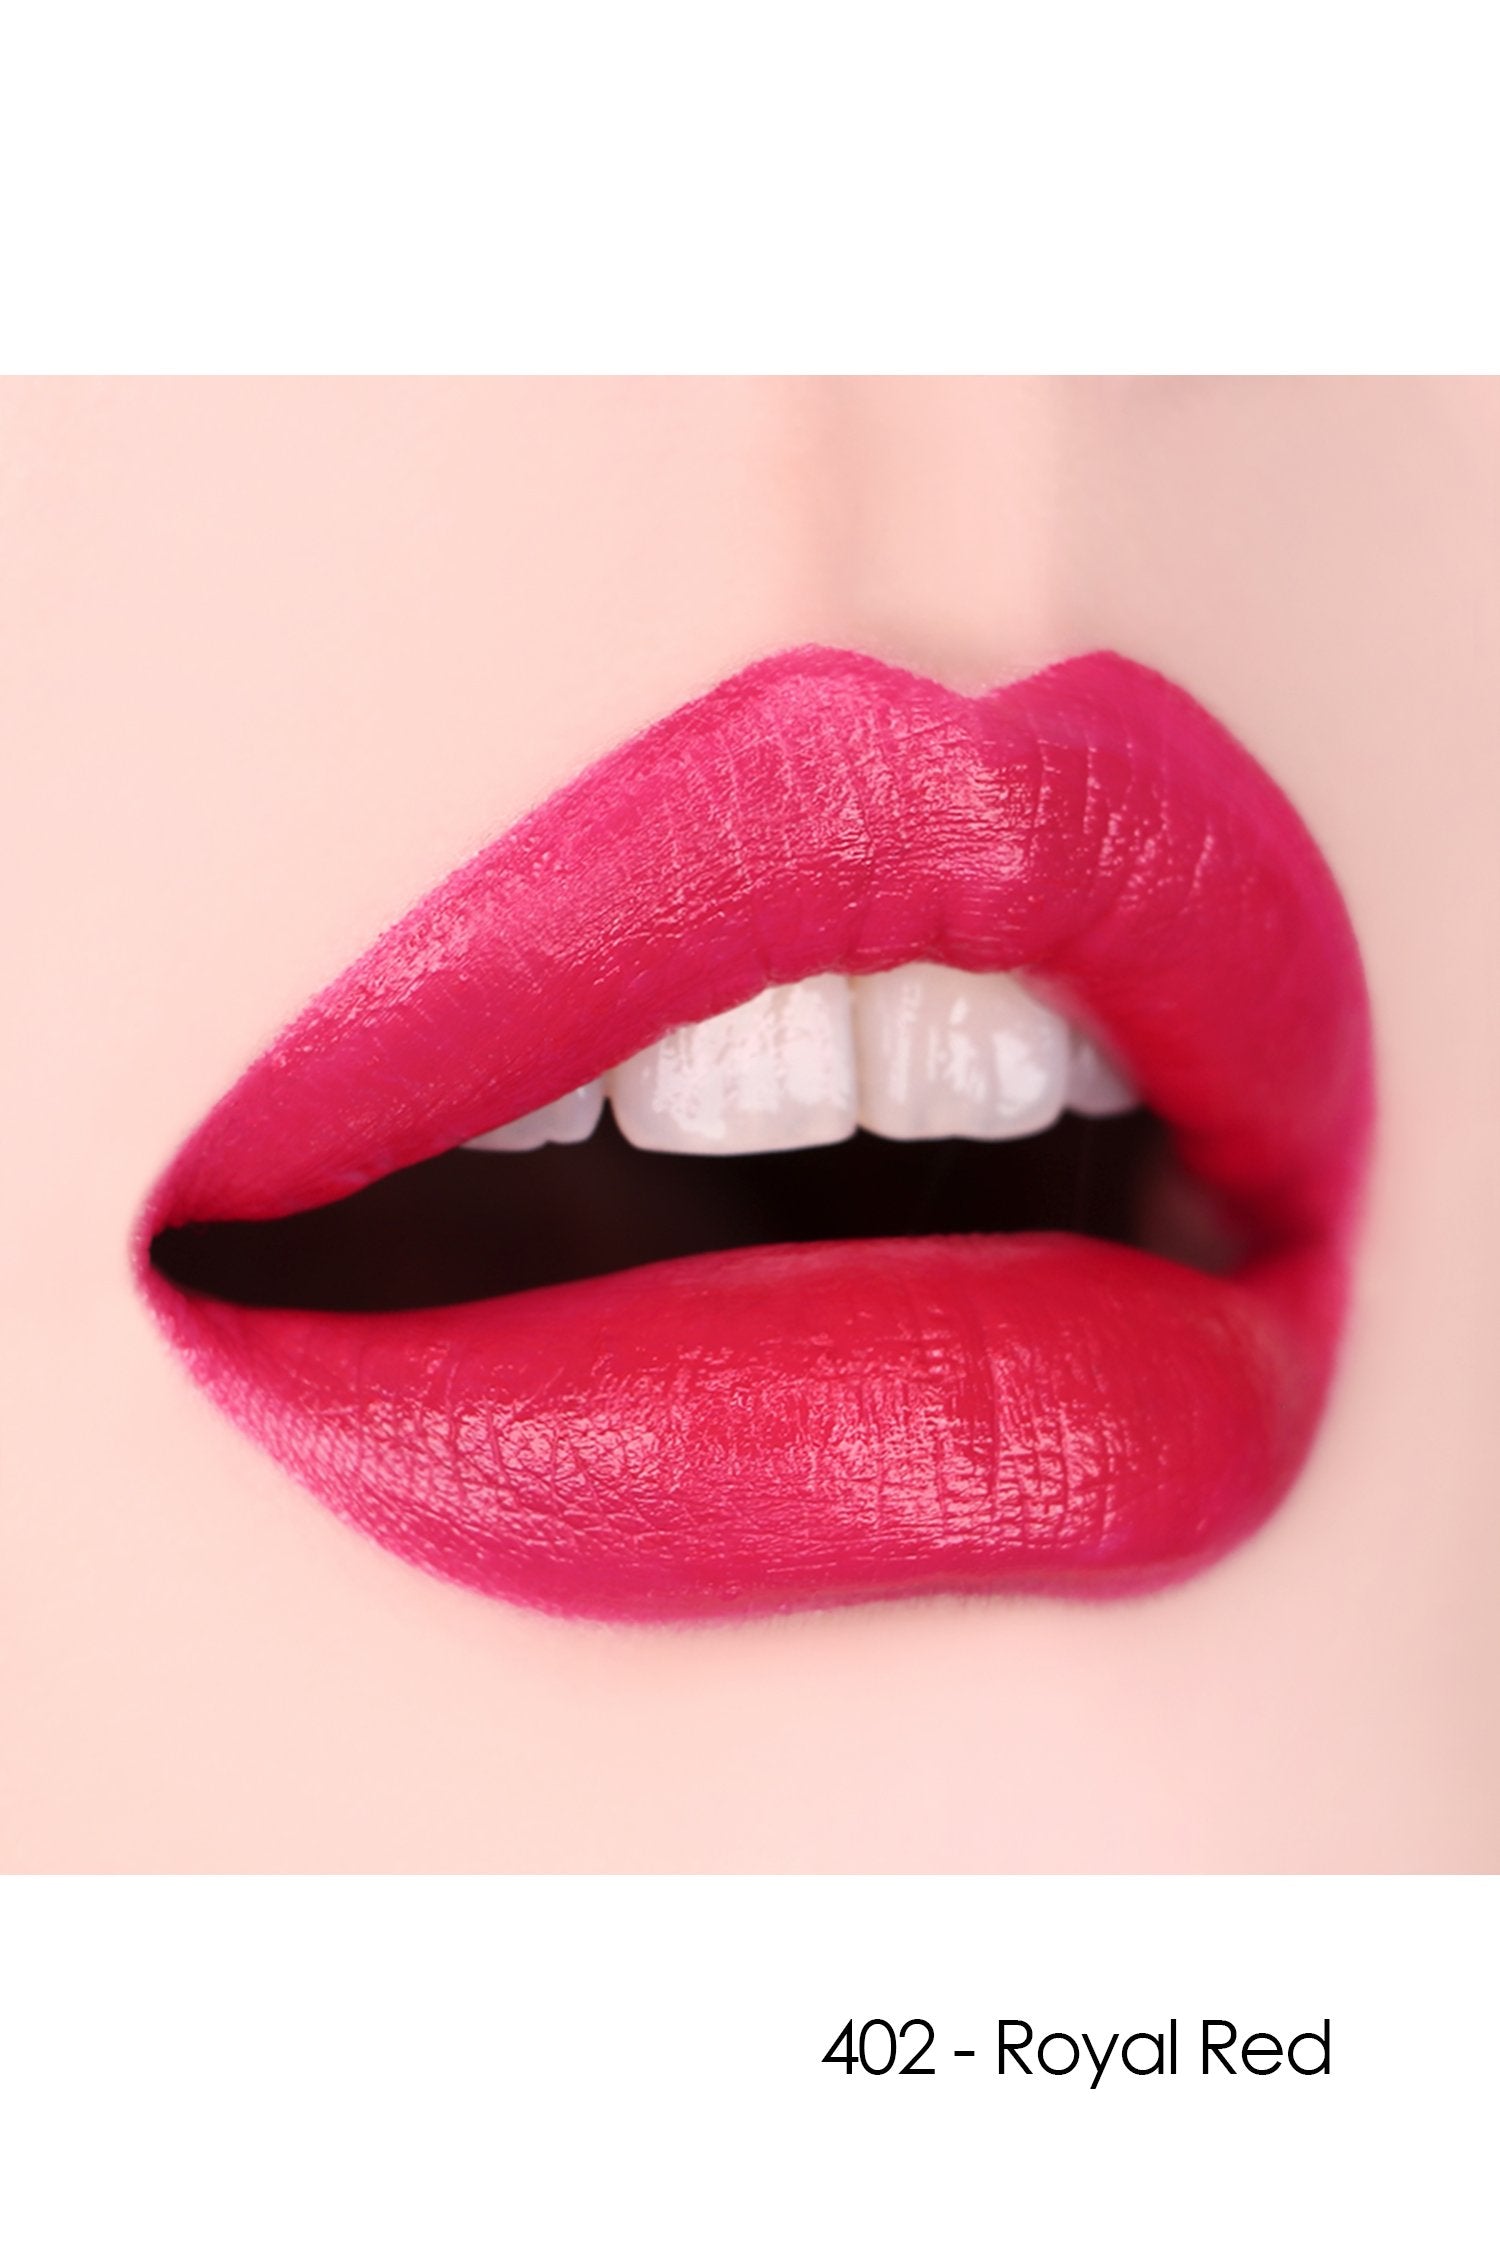 Lips with Sui Black - Rouge S  402 Royal Red